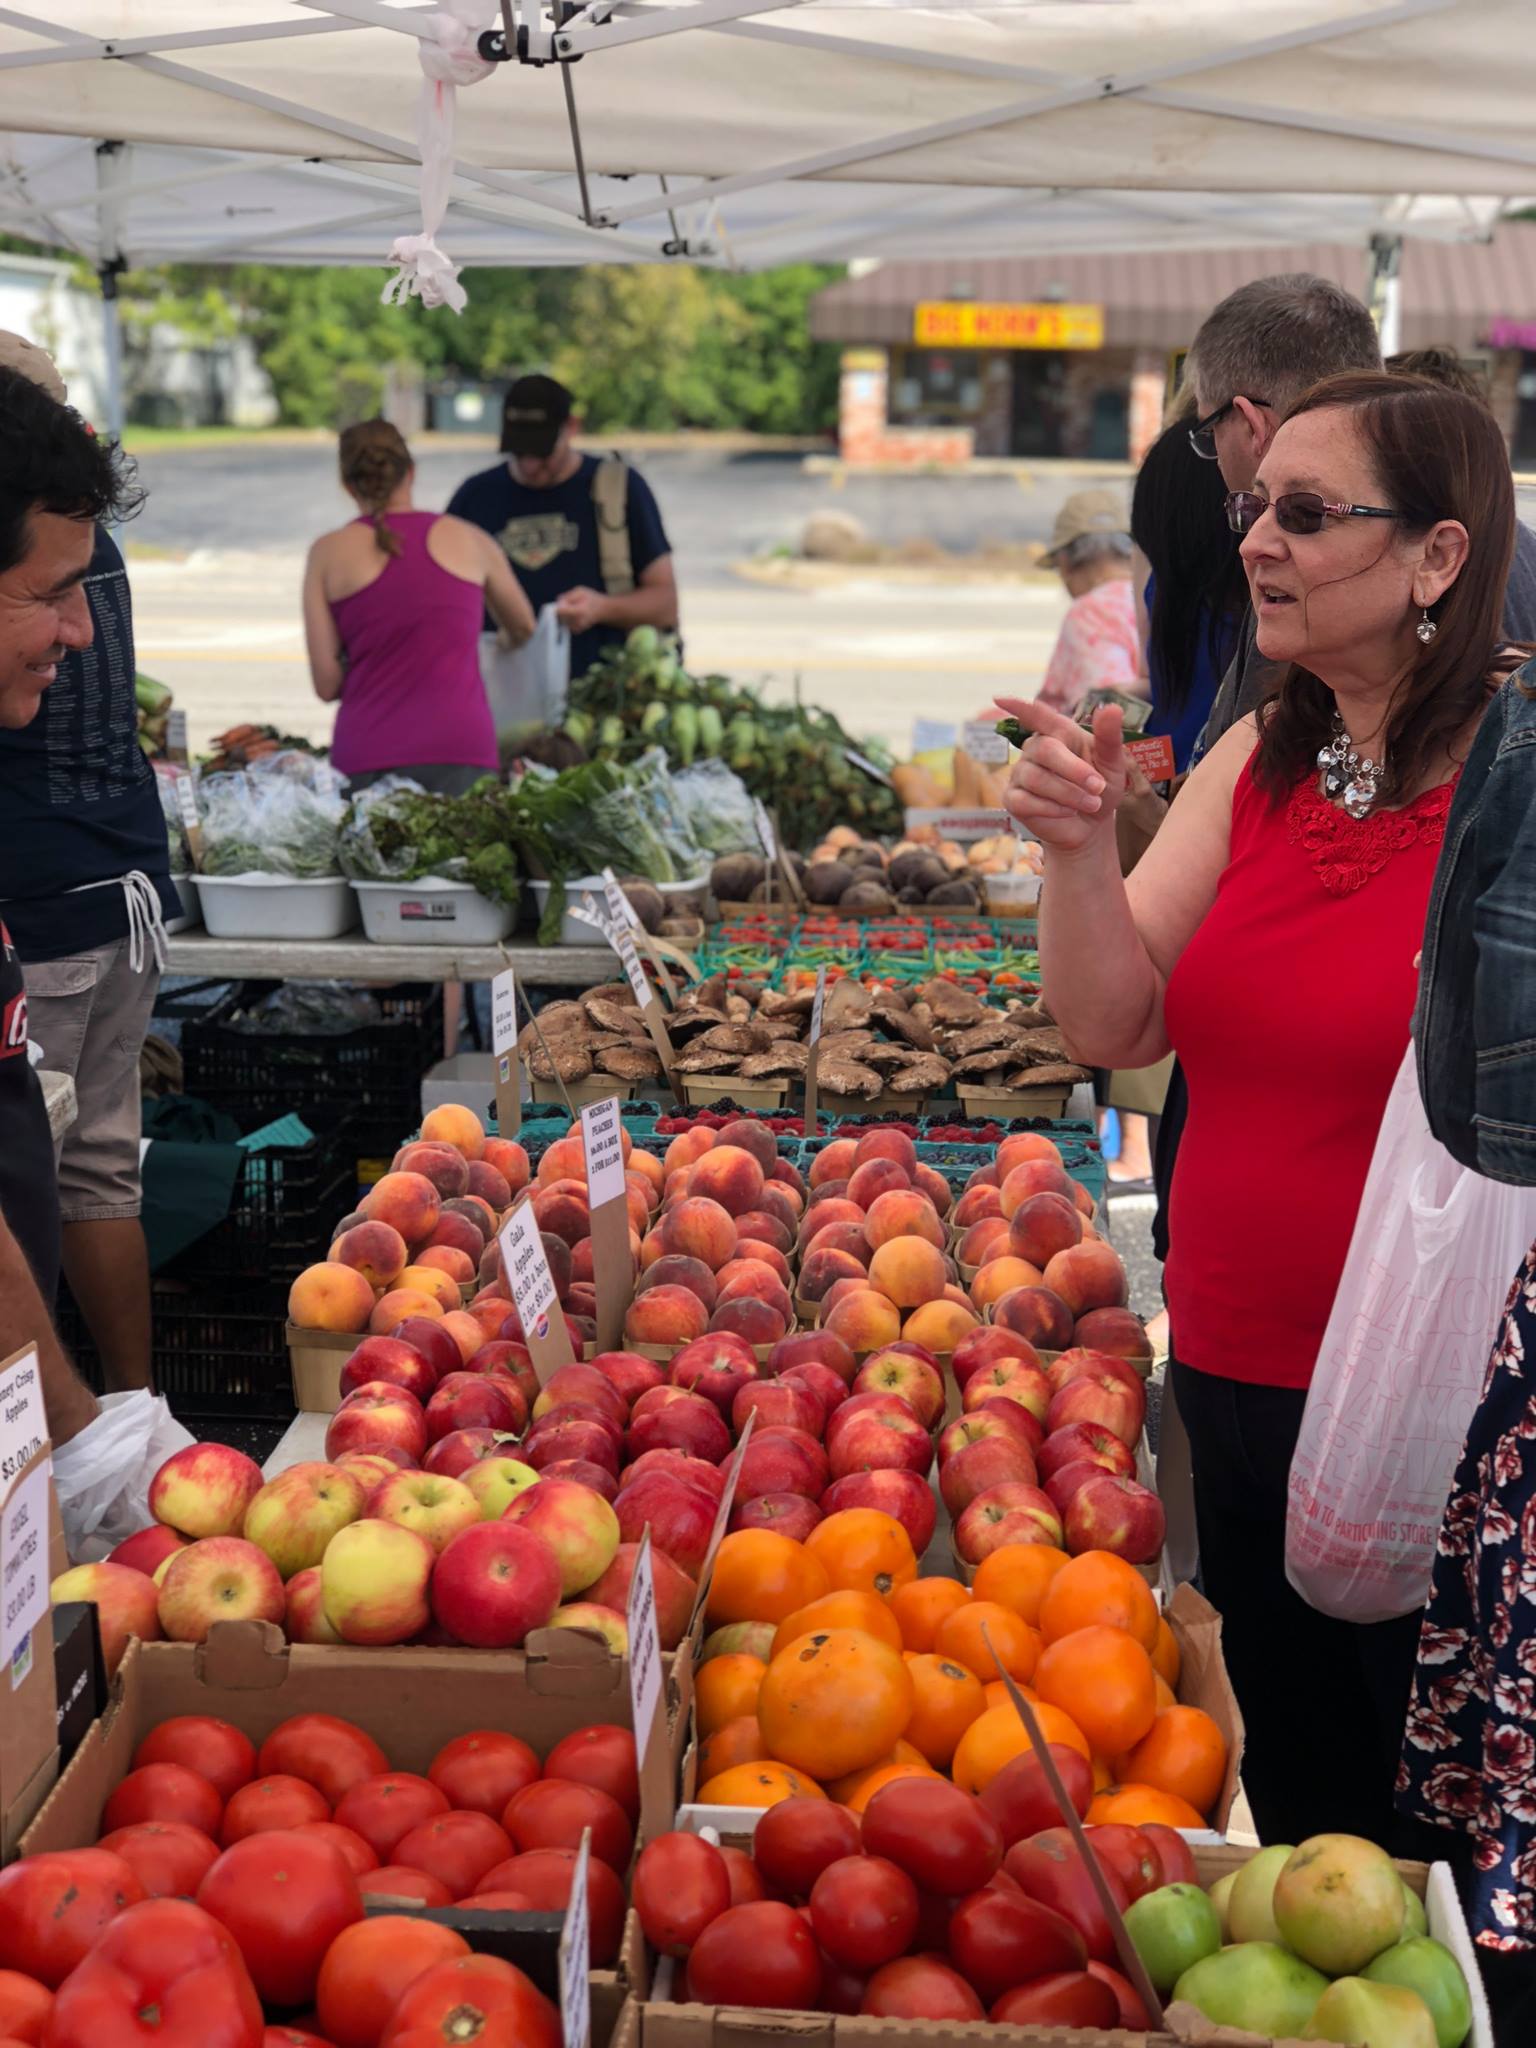 Top 10 of 2018: #1 Launching of East Grand Farmers & Artisans Market